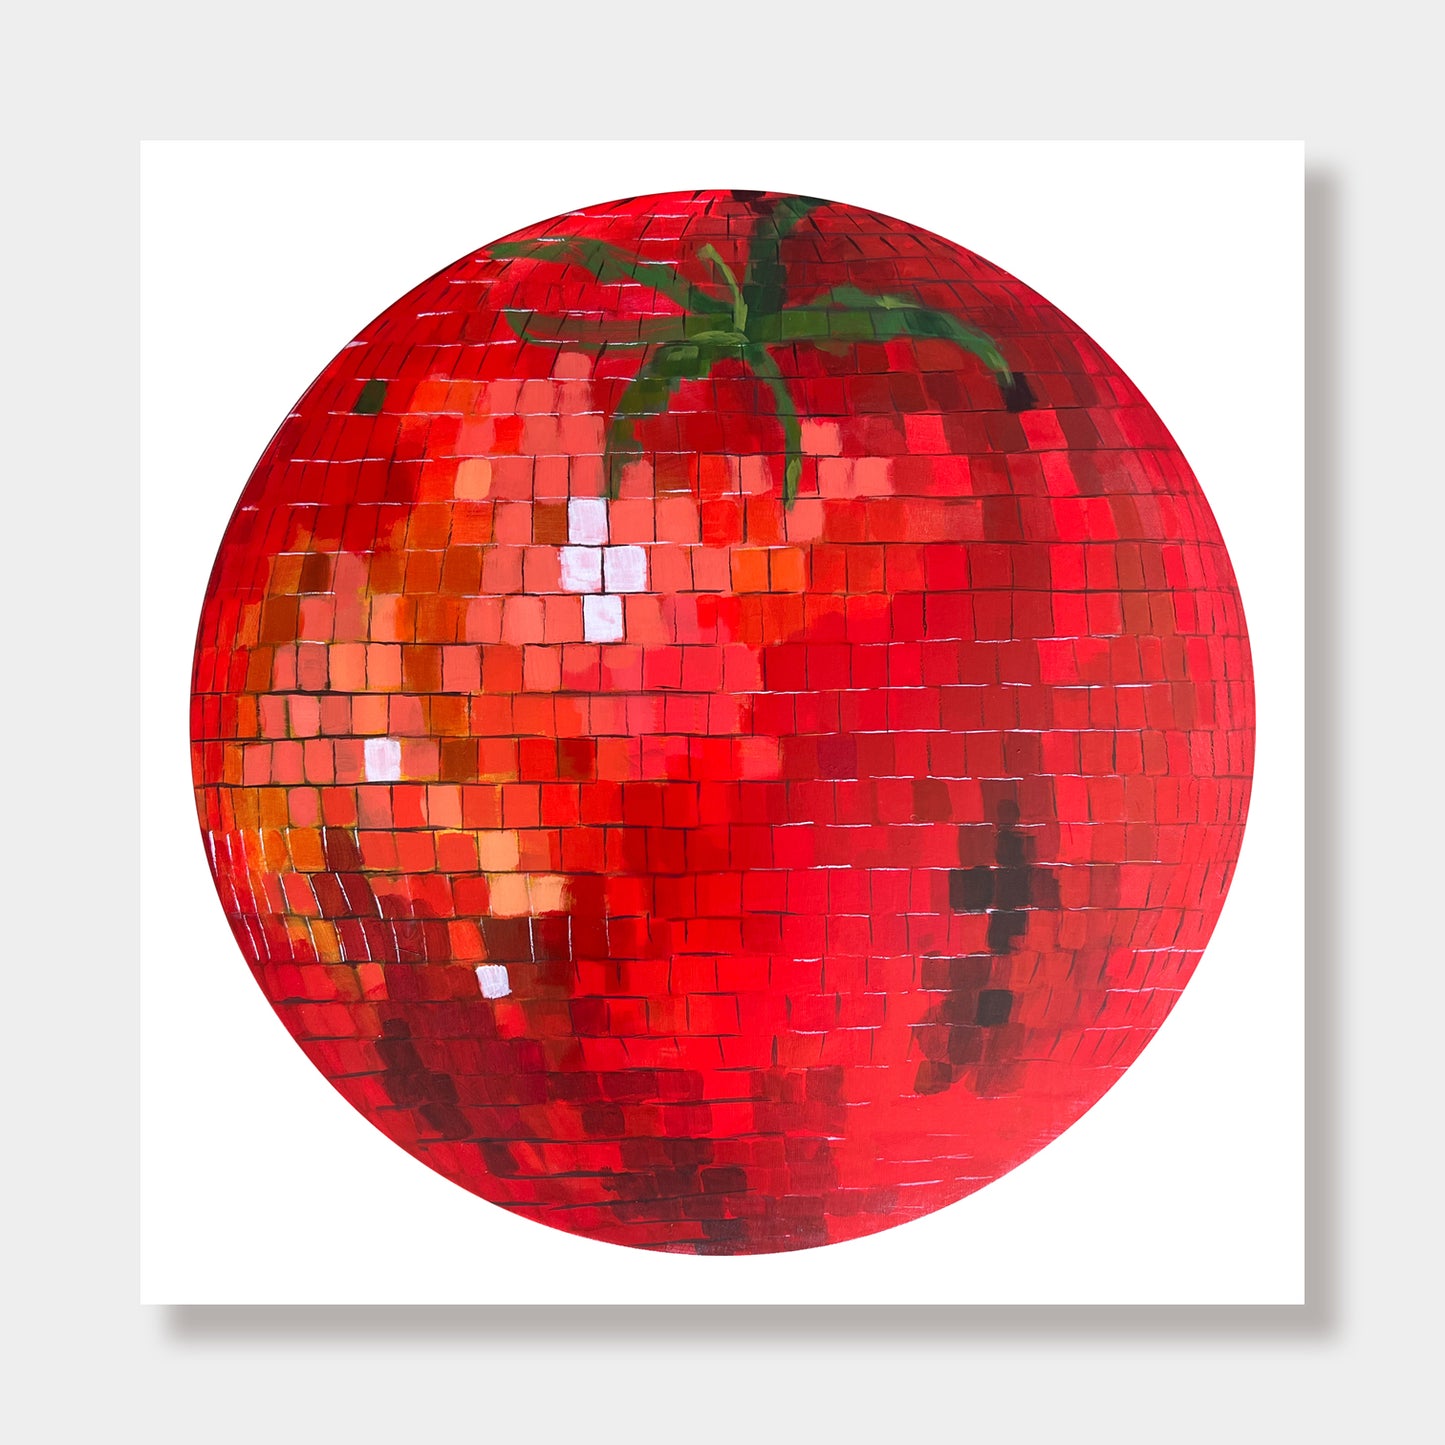 "Hot House" Tomato Disco Ball Painting Paper Print